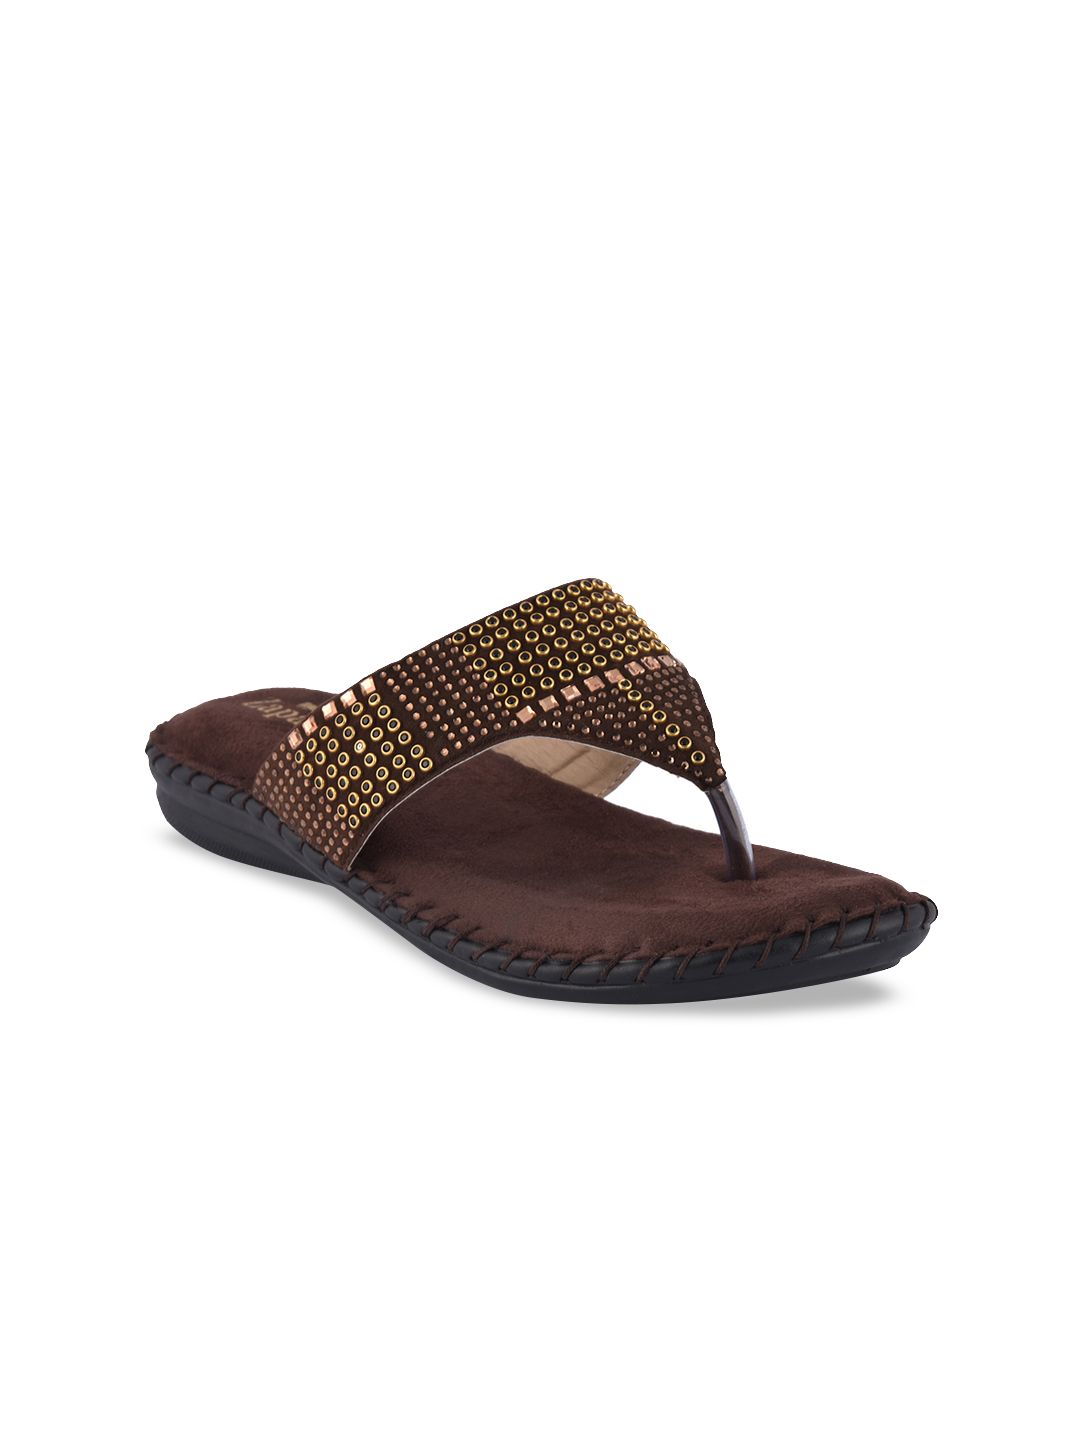 ZAPATOZ Women Brown Embellished Suede Open Toe Flats Price in India